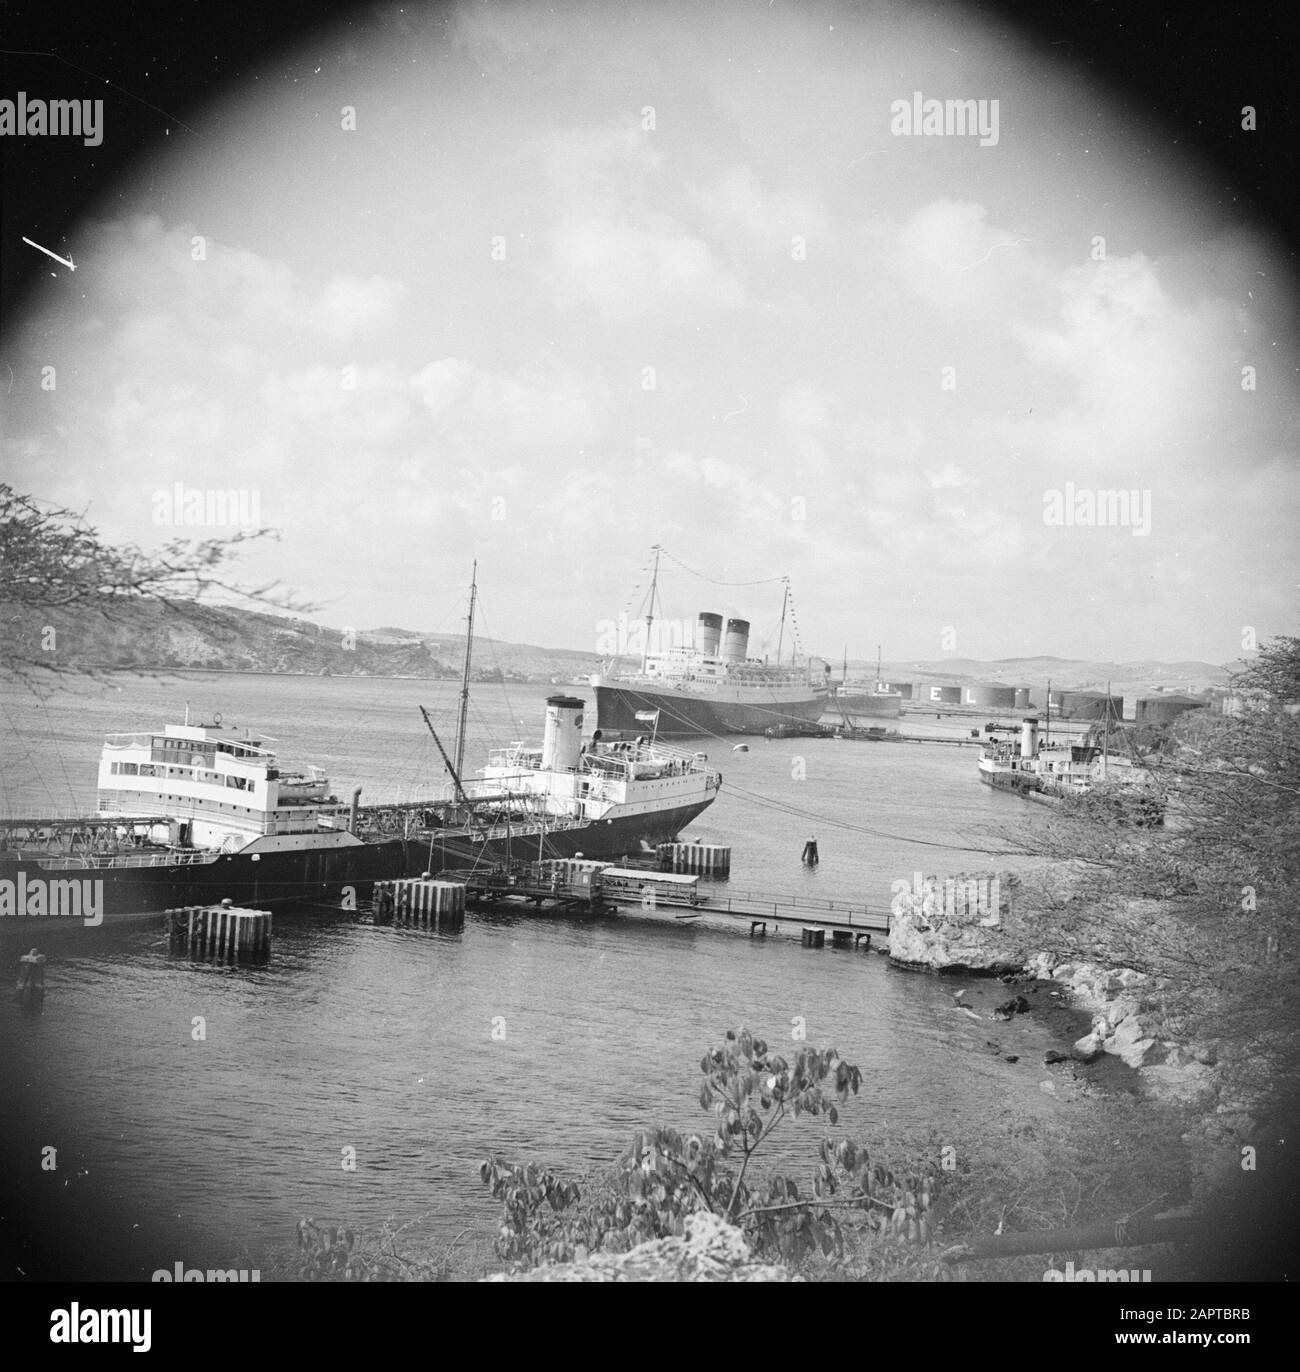 Travel to Suriname and the Netherlands Antilles  View of the jetty at the oil refinery at the Caracas Bay on Curaçao Date: 1947 Location: Curaçao Keywords: refineries, ships Stock Photo